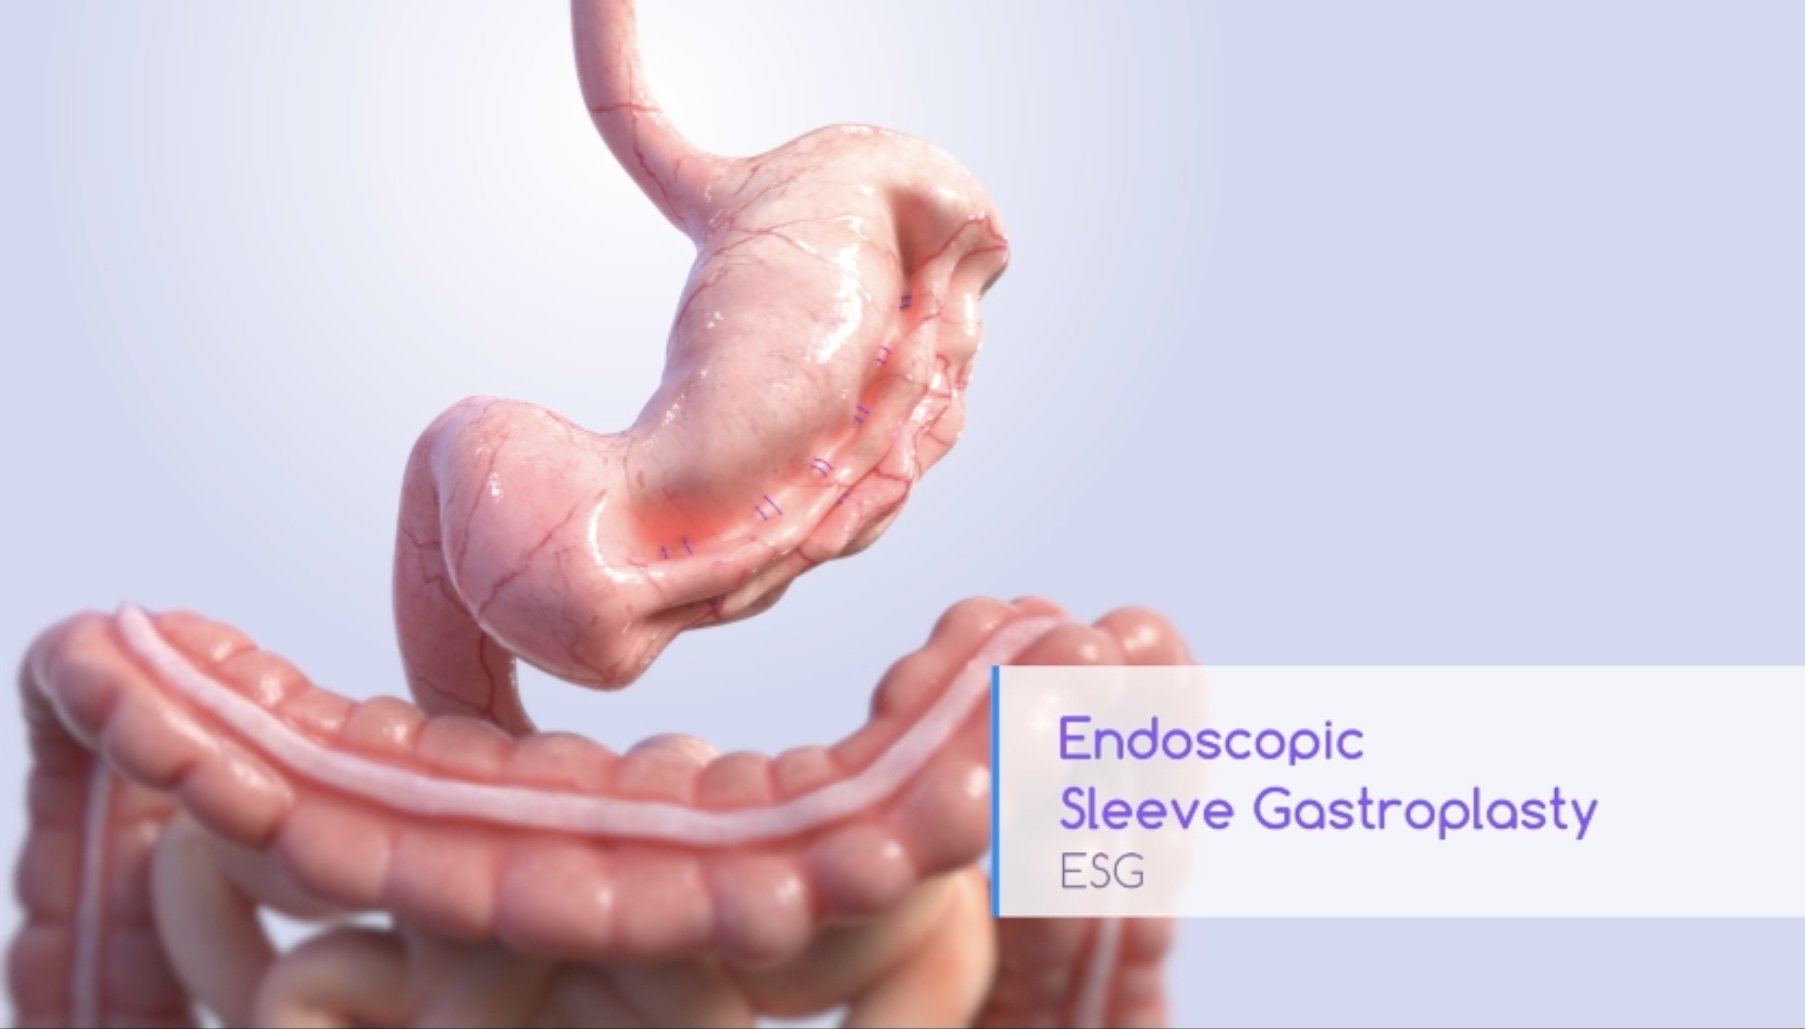 The Ultimate Guide to Endoscopic Sleeve Gastroplasty (ESG)